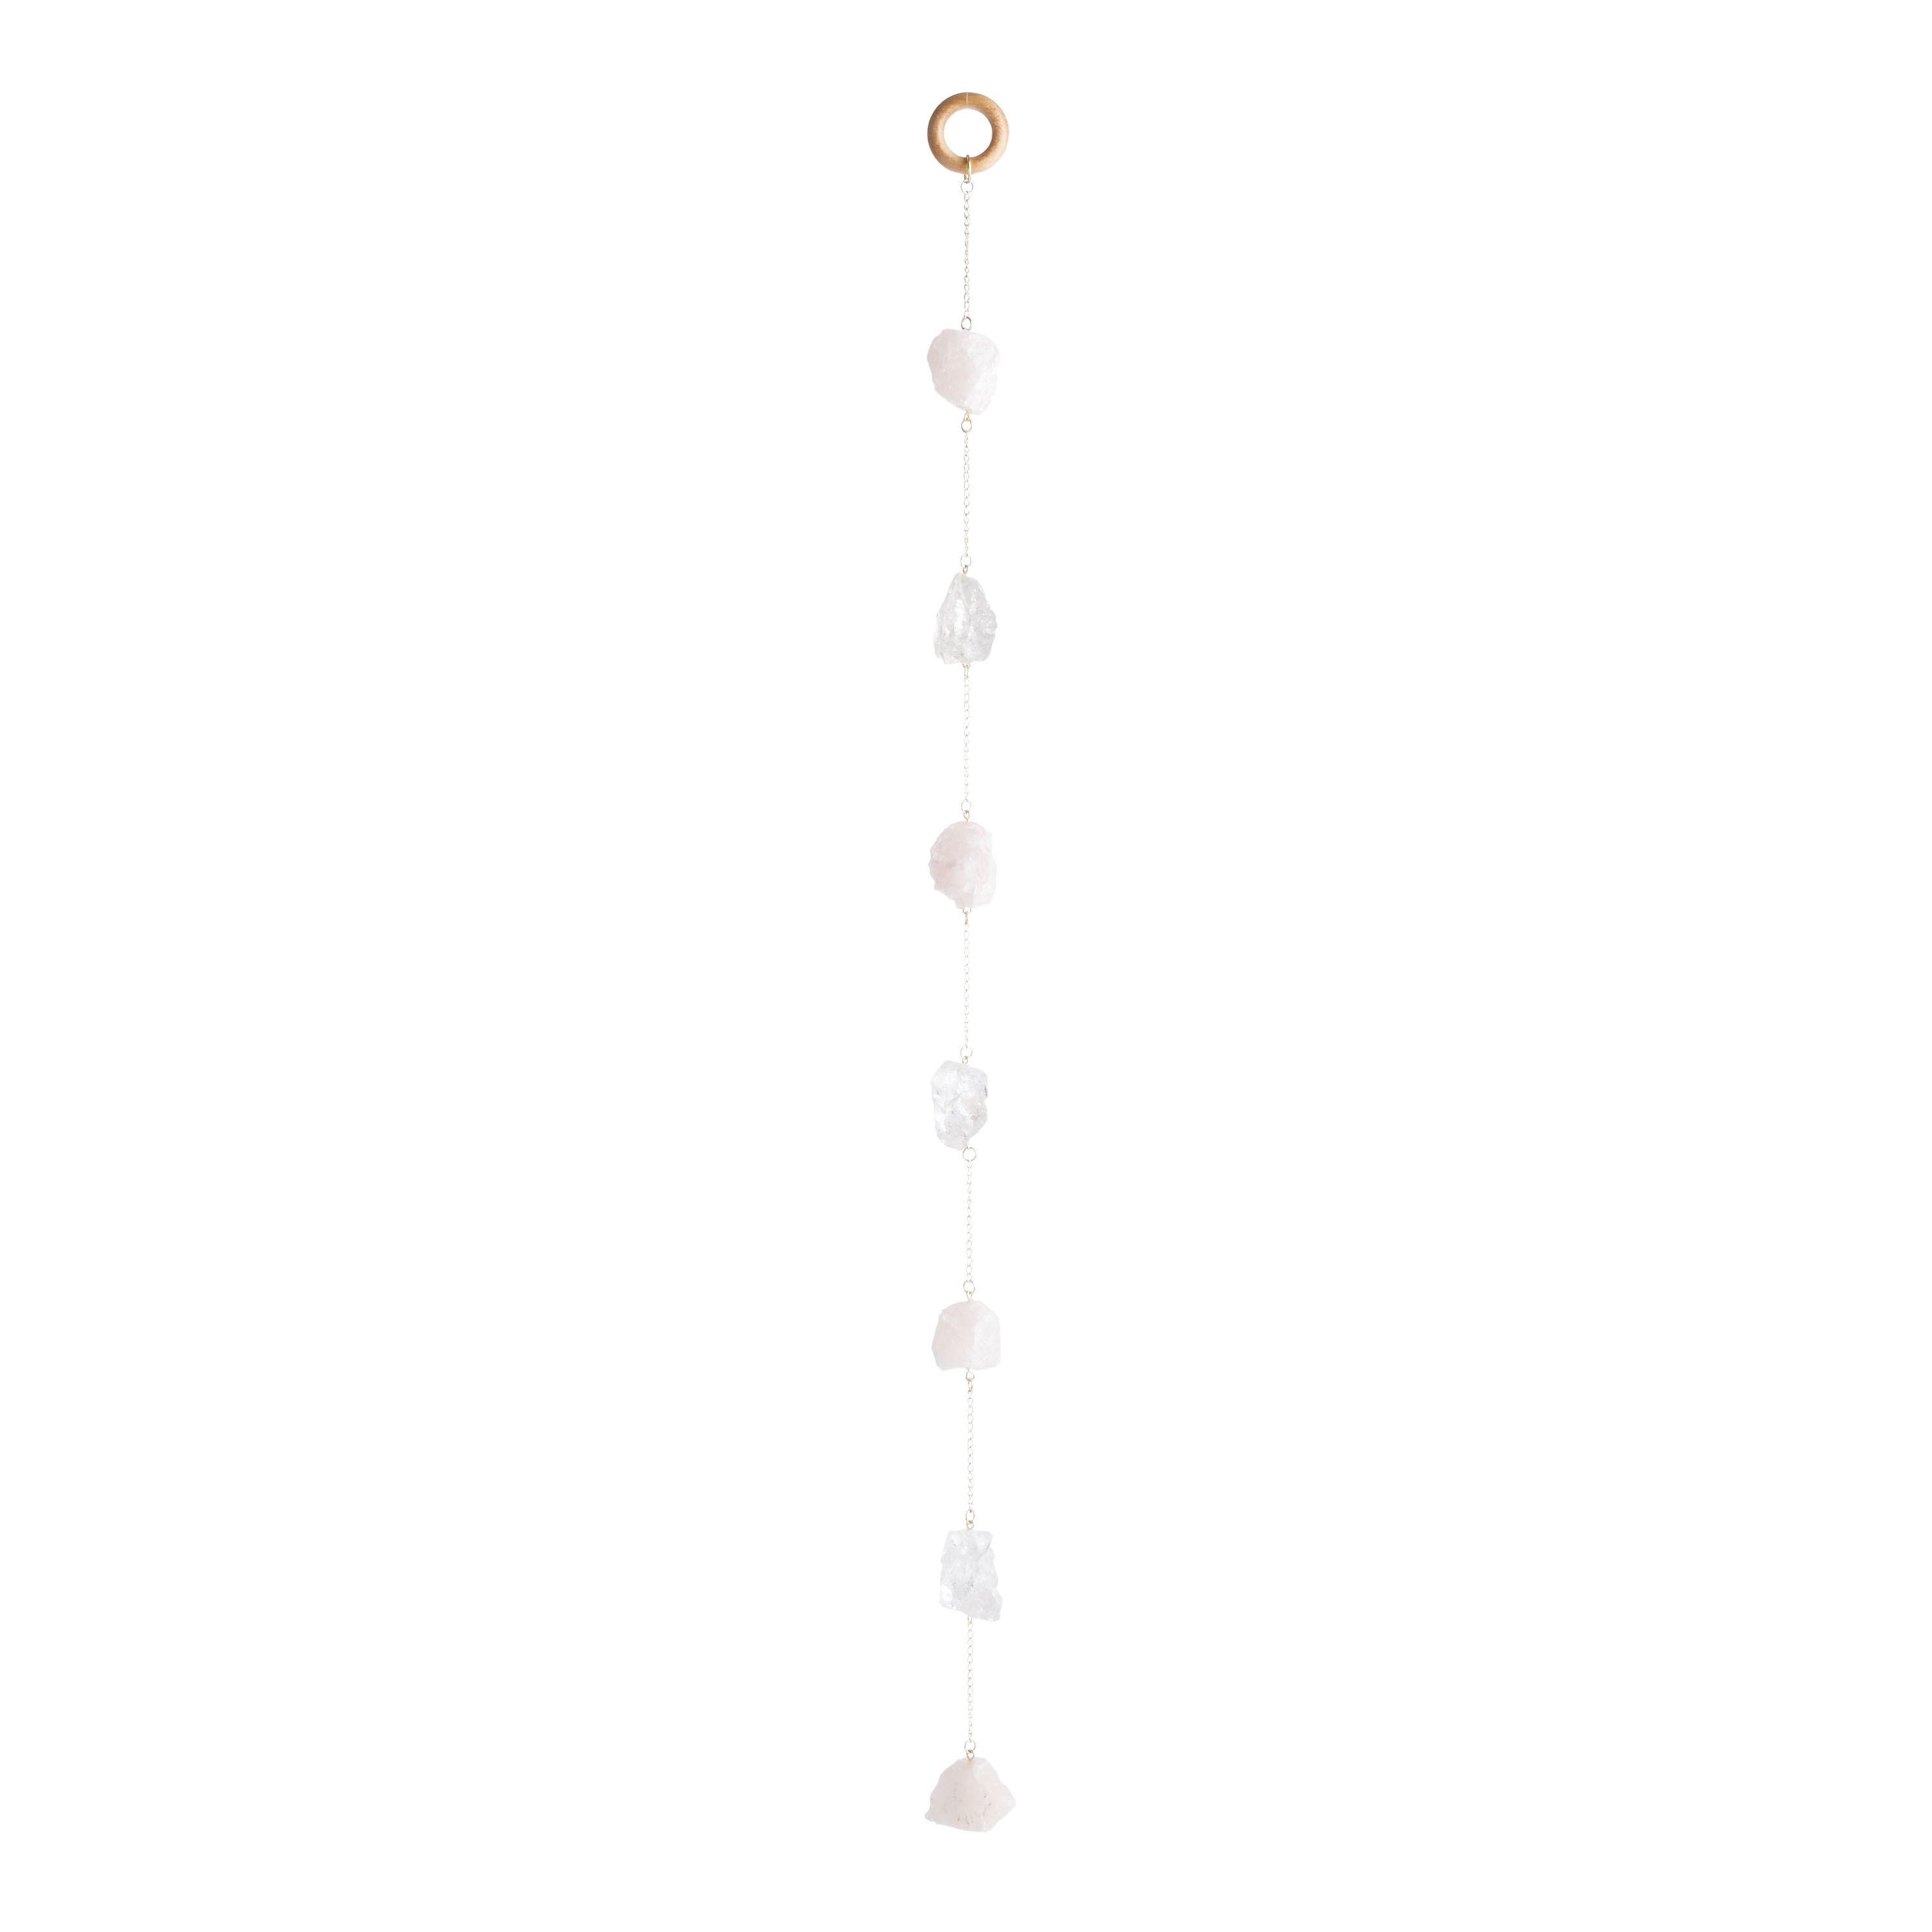 Natural Crystal And Metal Chain Hanging Decor | World Market